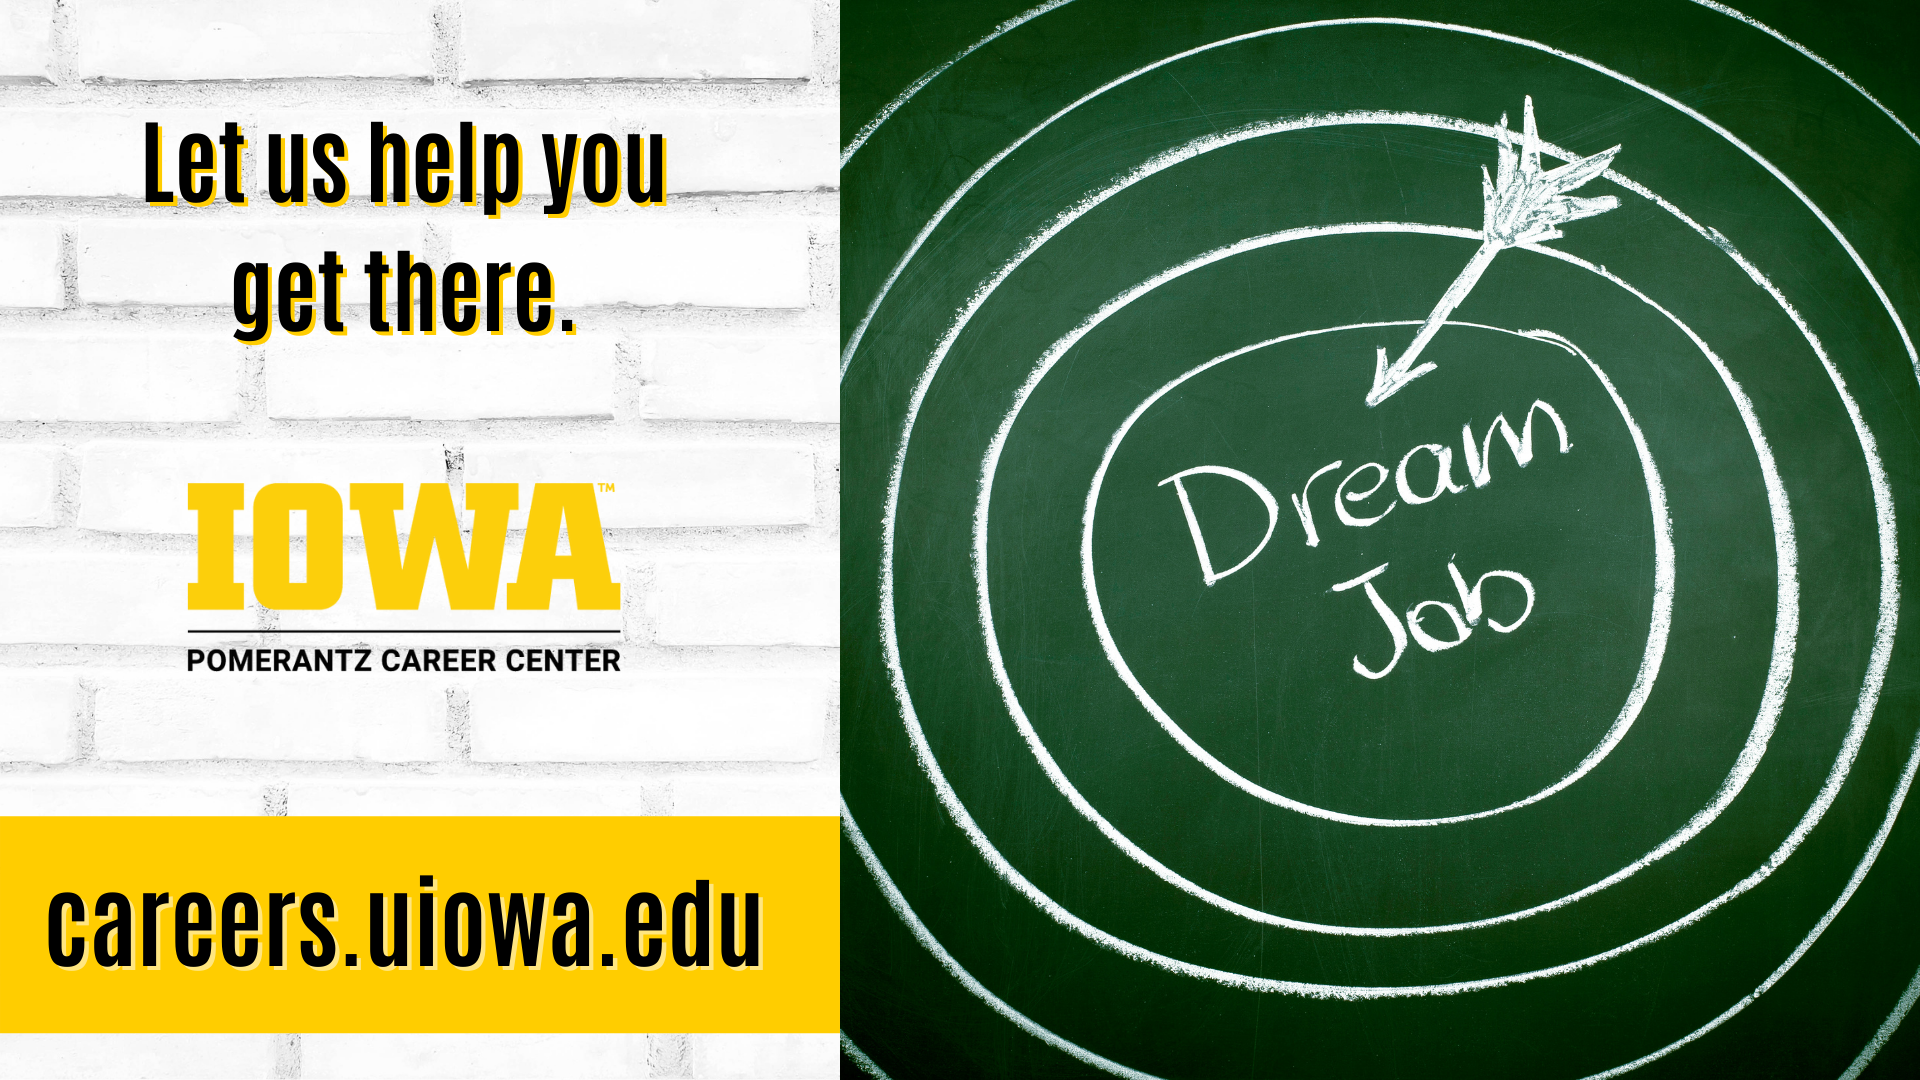 Let us help you get there. careers.uiowa.edu bullseye with "dream job" in middle